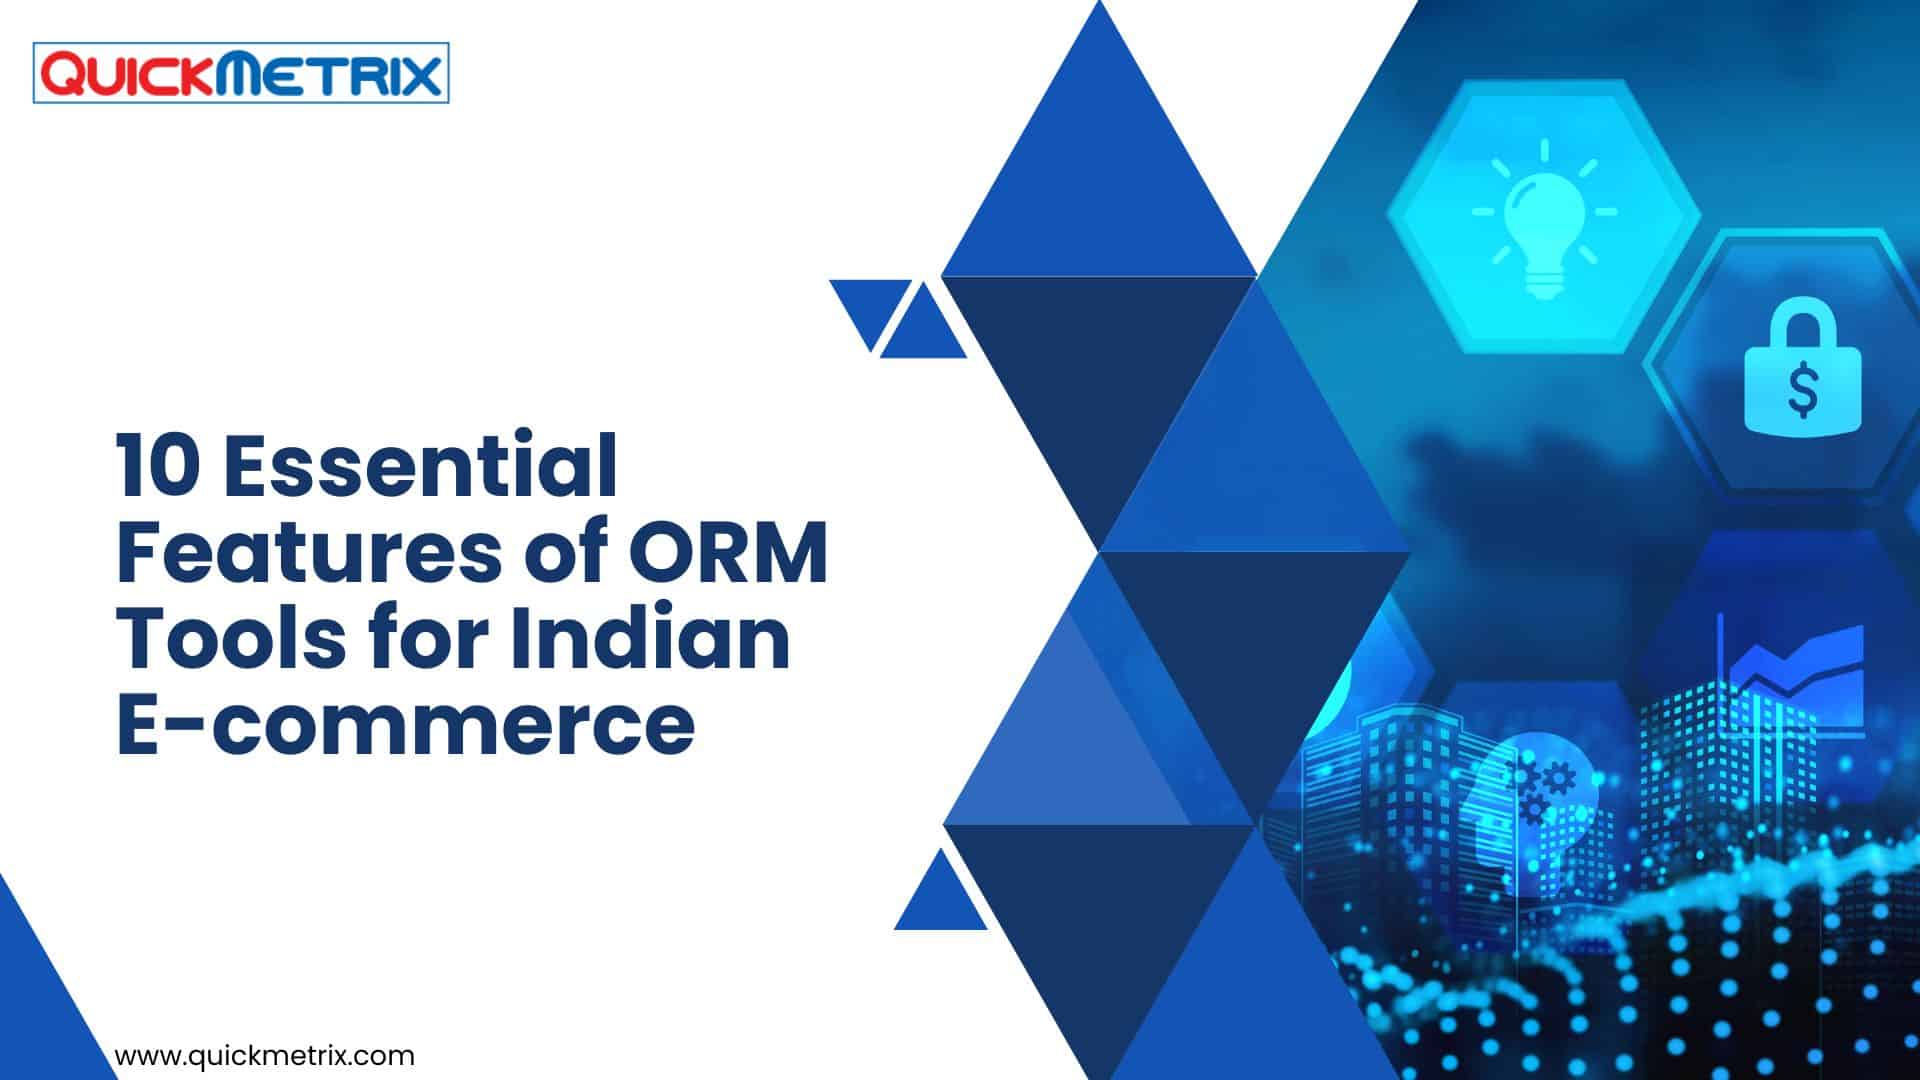 10 Essential Features of ORM Tools for Indian E-commerce